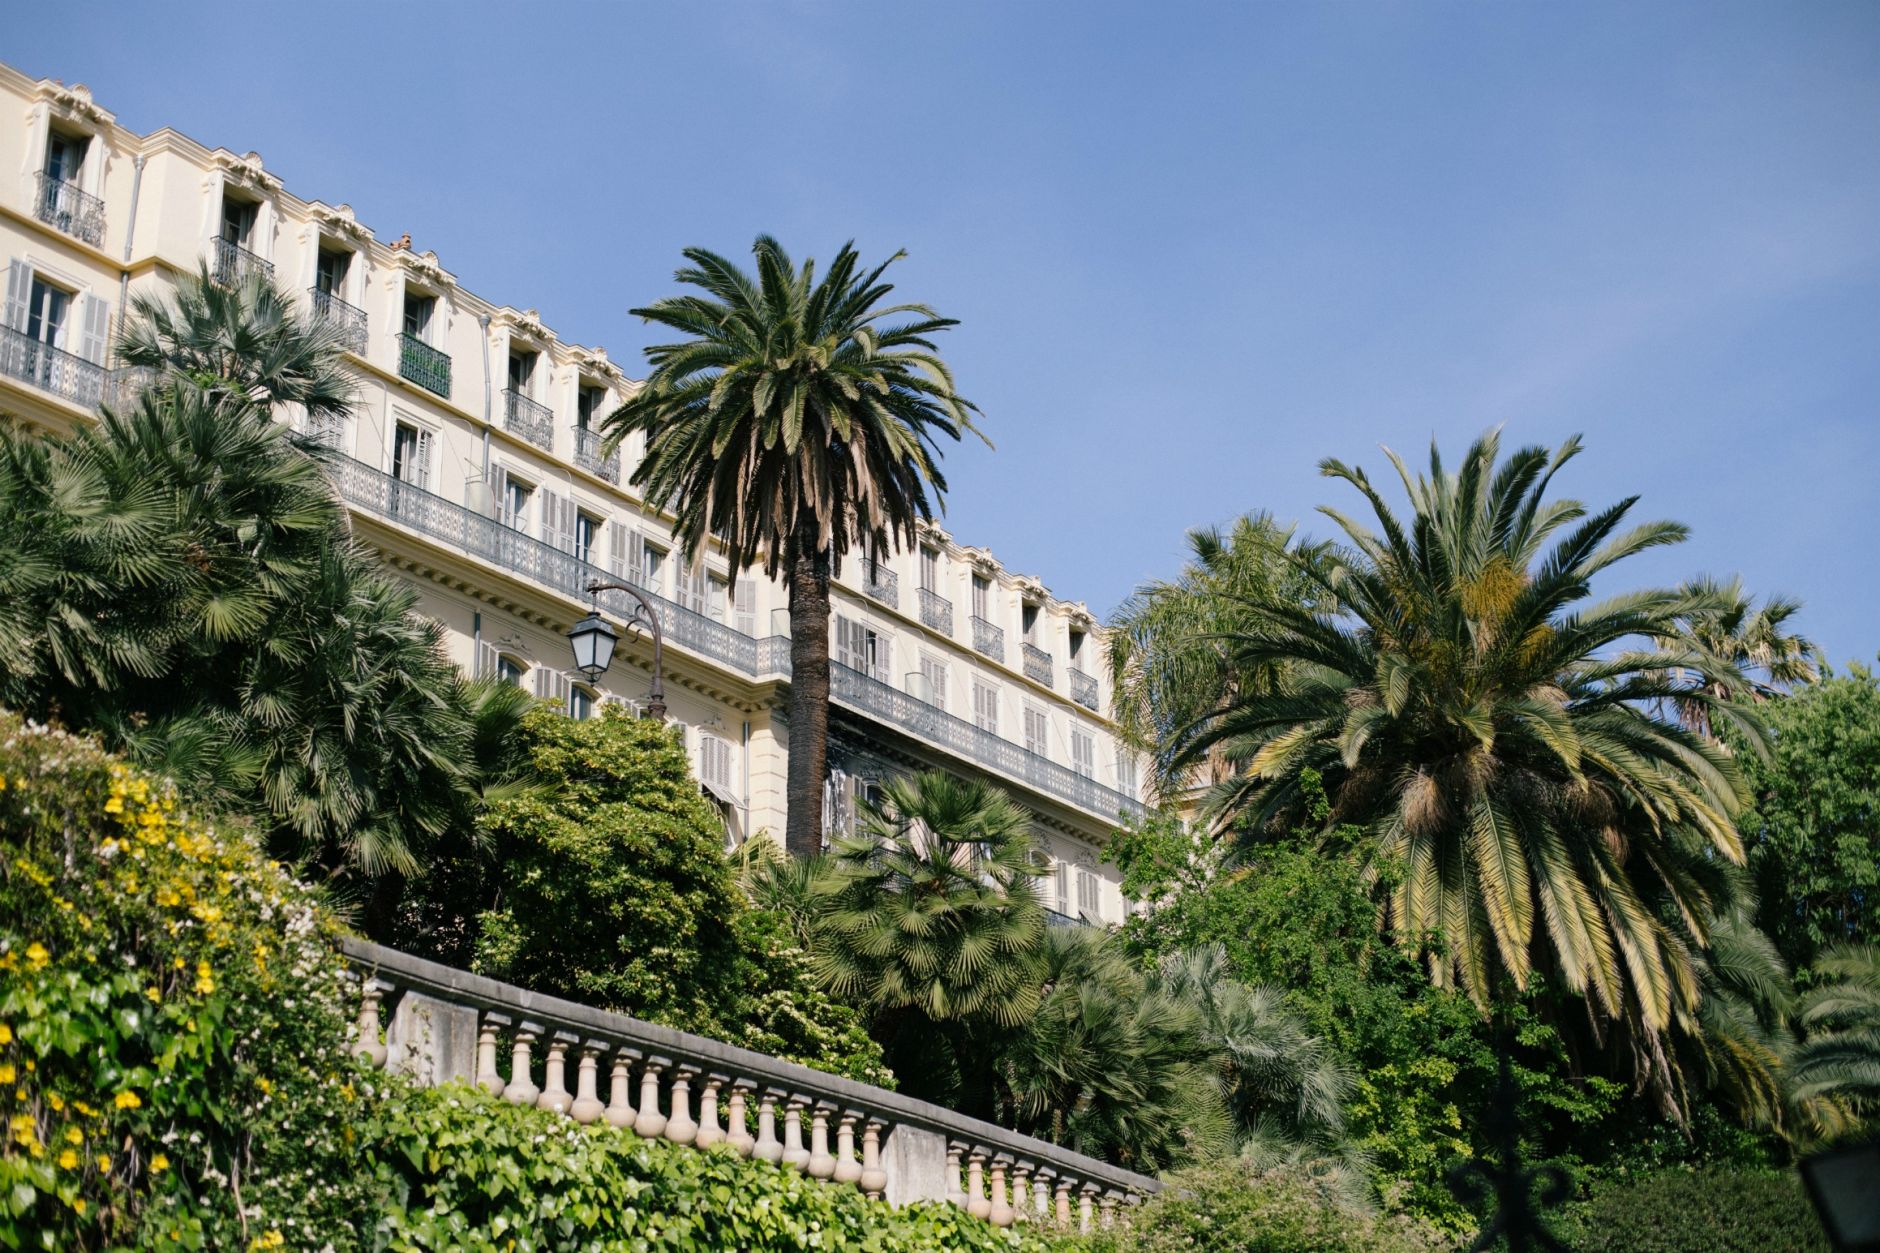 WHAT TO DO IN NICE, COTE D’AZUR FOR A WEEKEND?